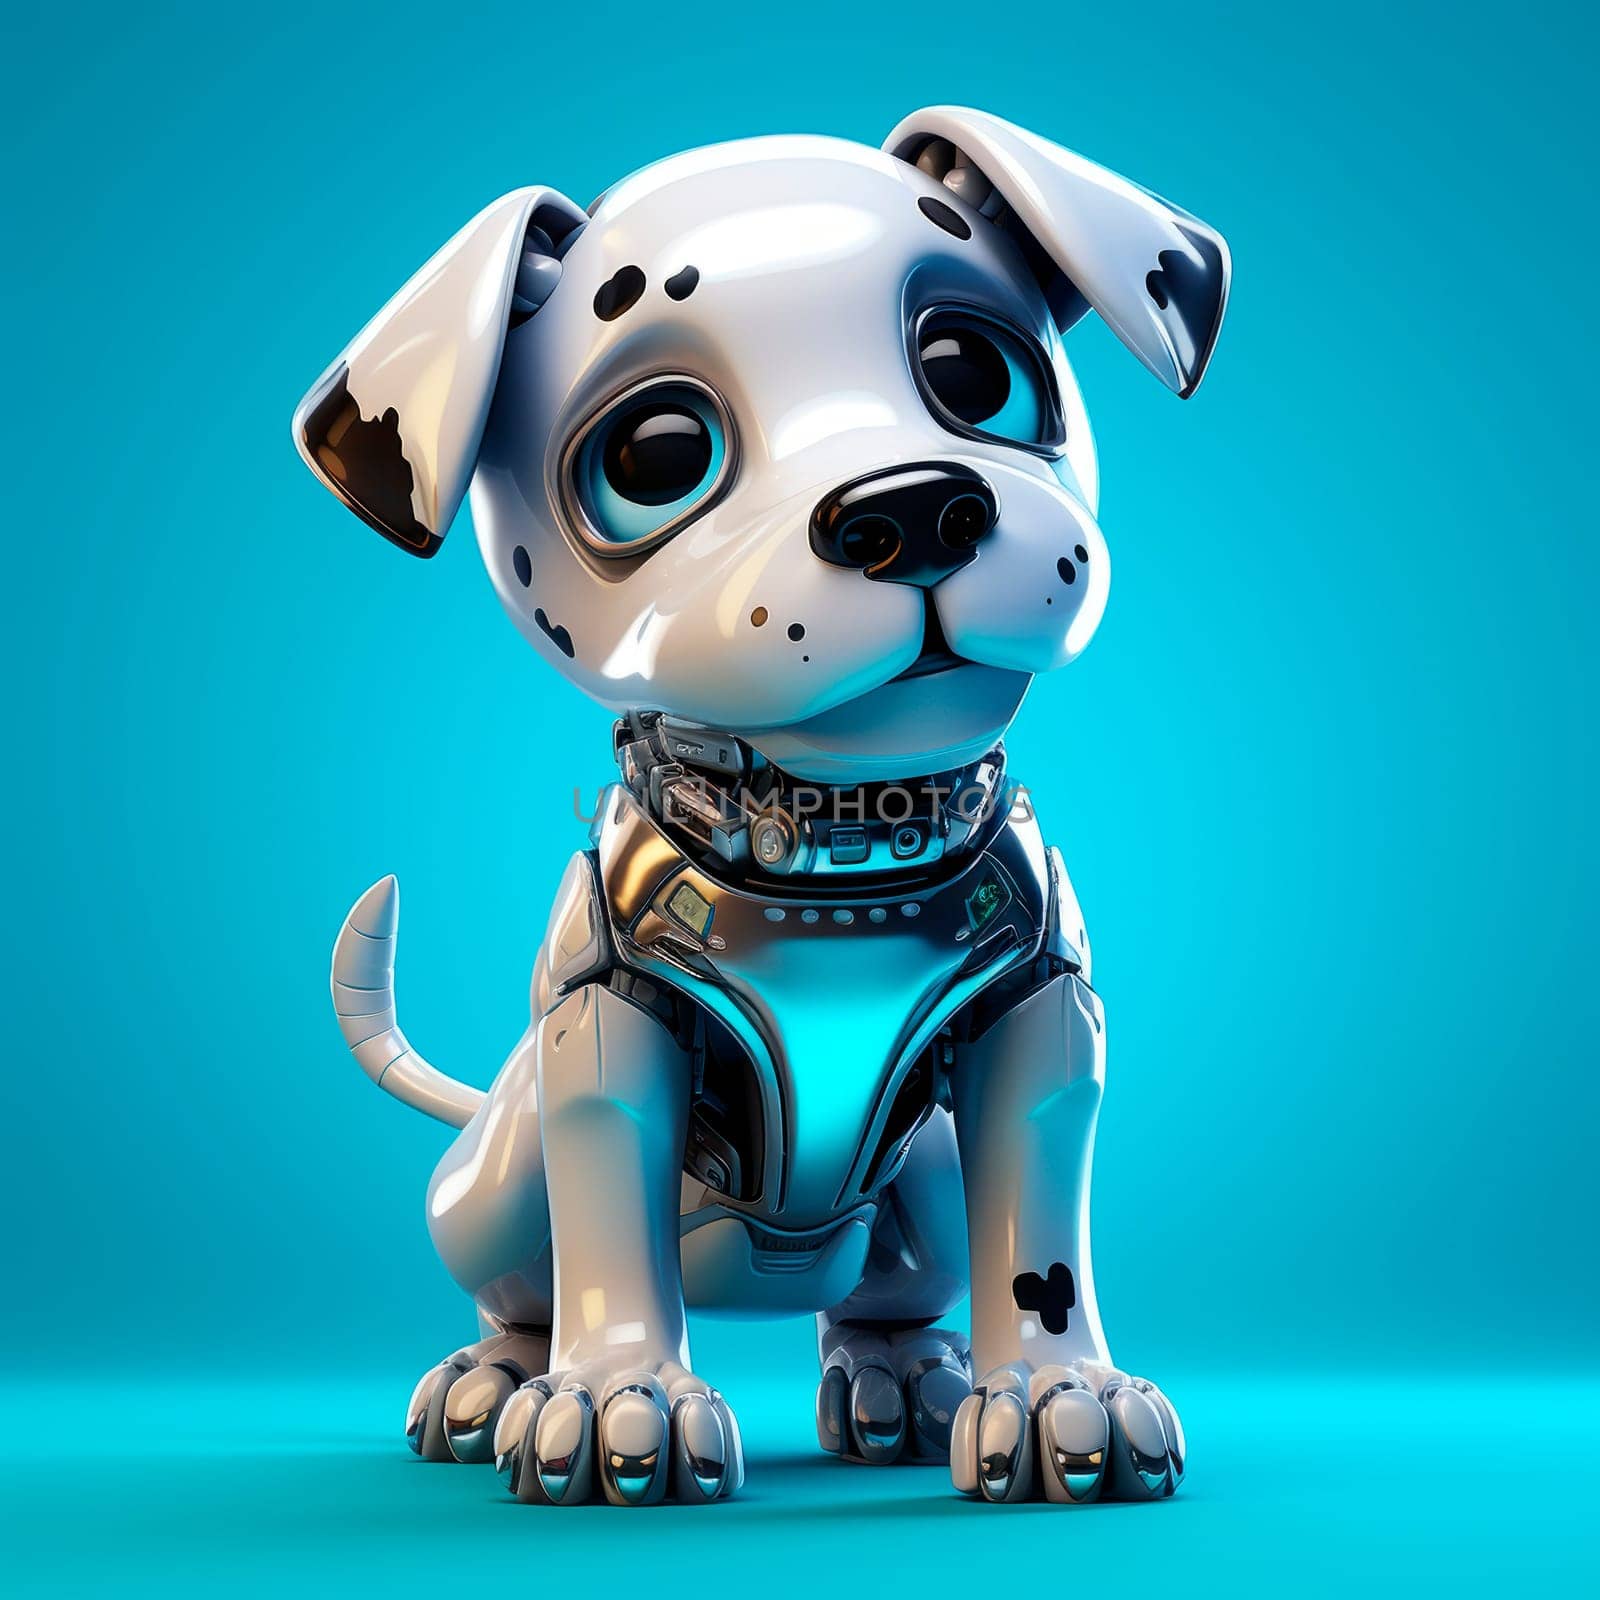 Toy robot dog on a blue background. High quality photo